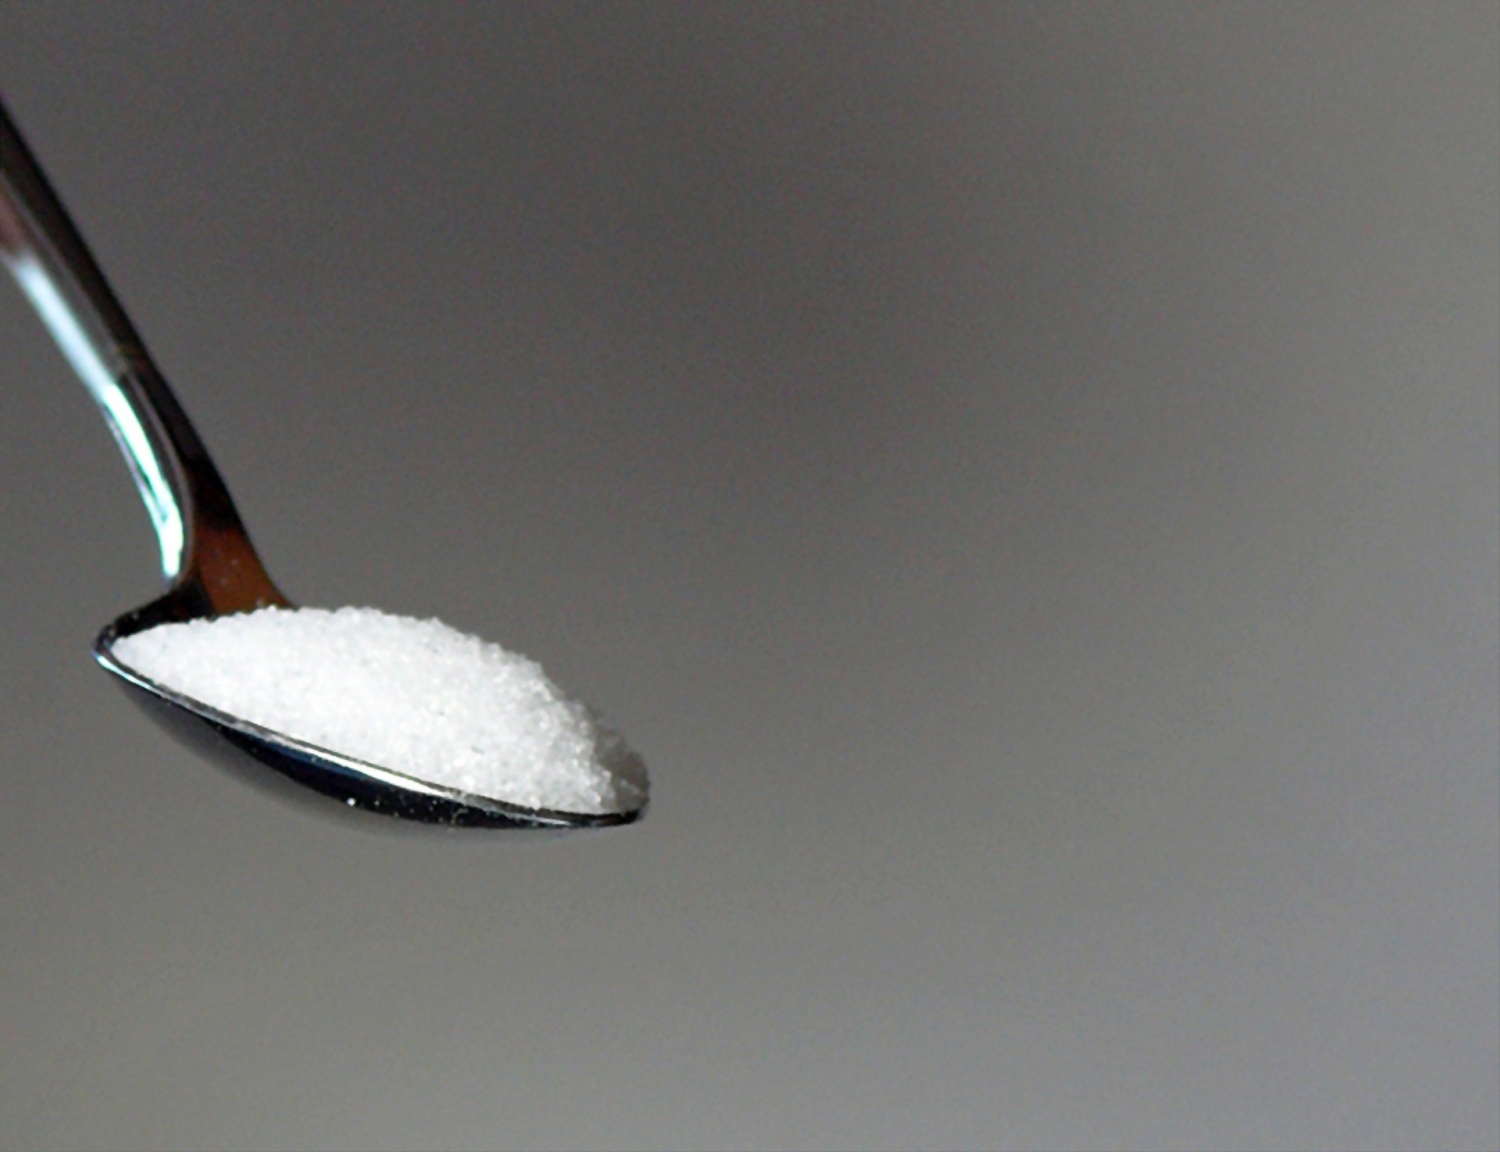 This Common Sweetener Was Found to Have Caused Learning and Memory Deficits